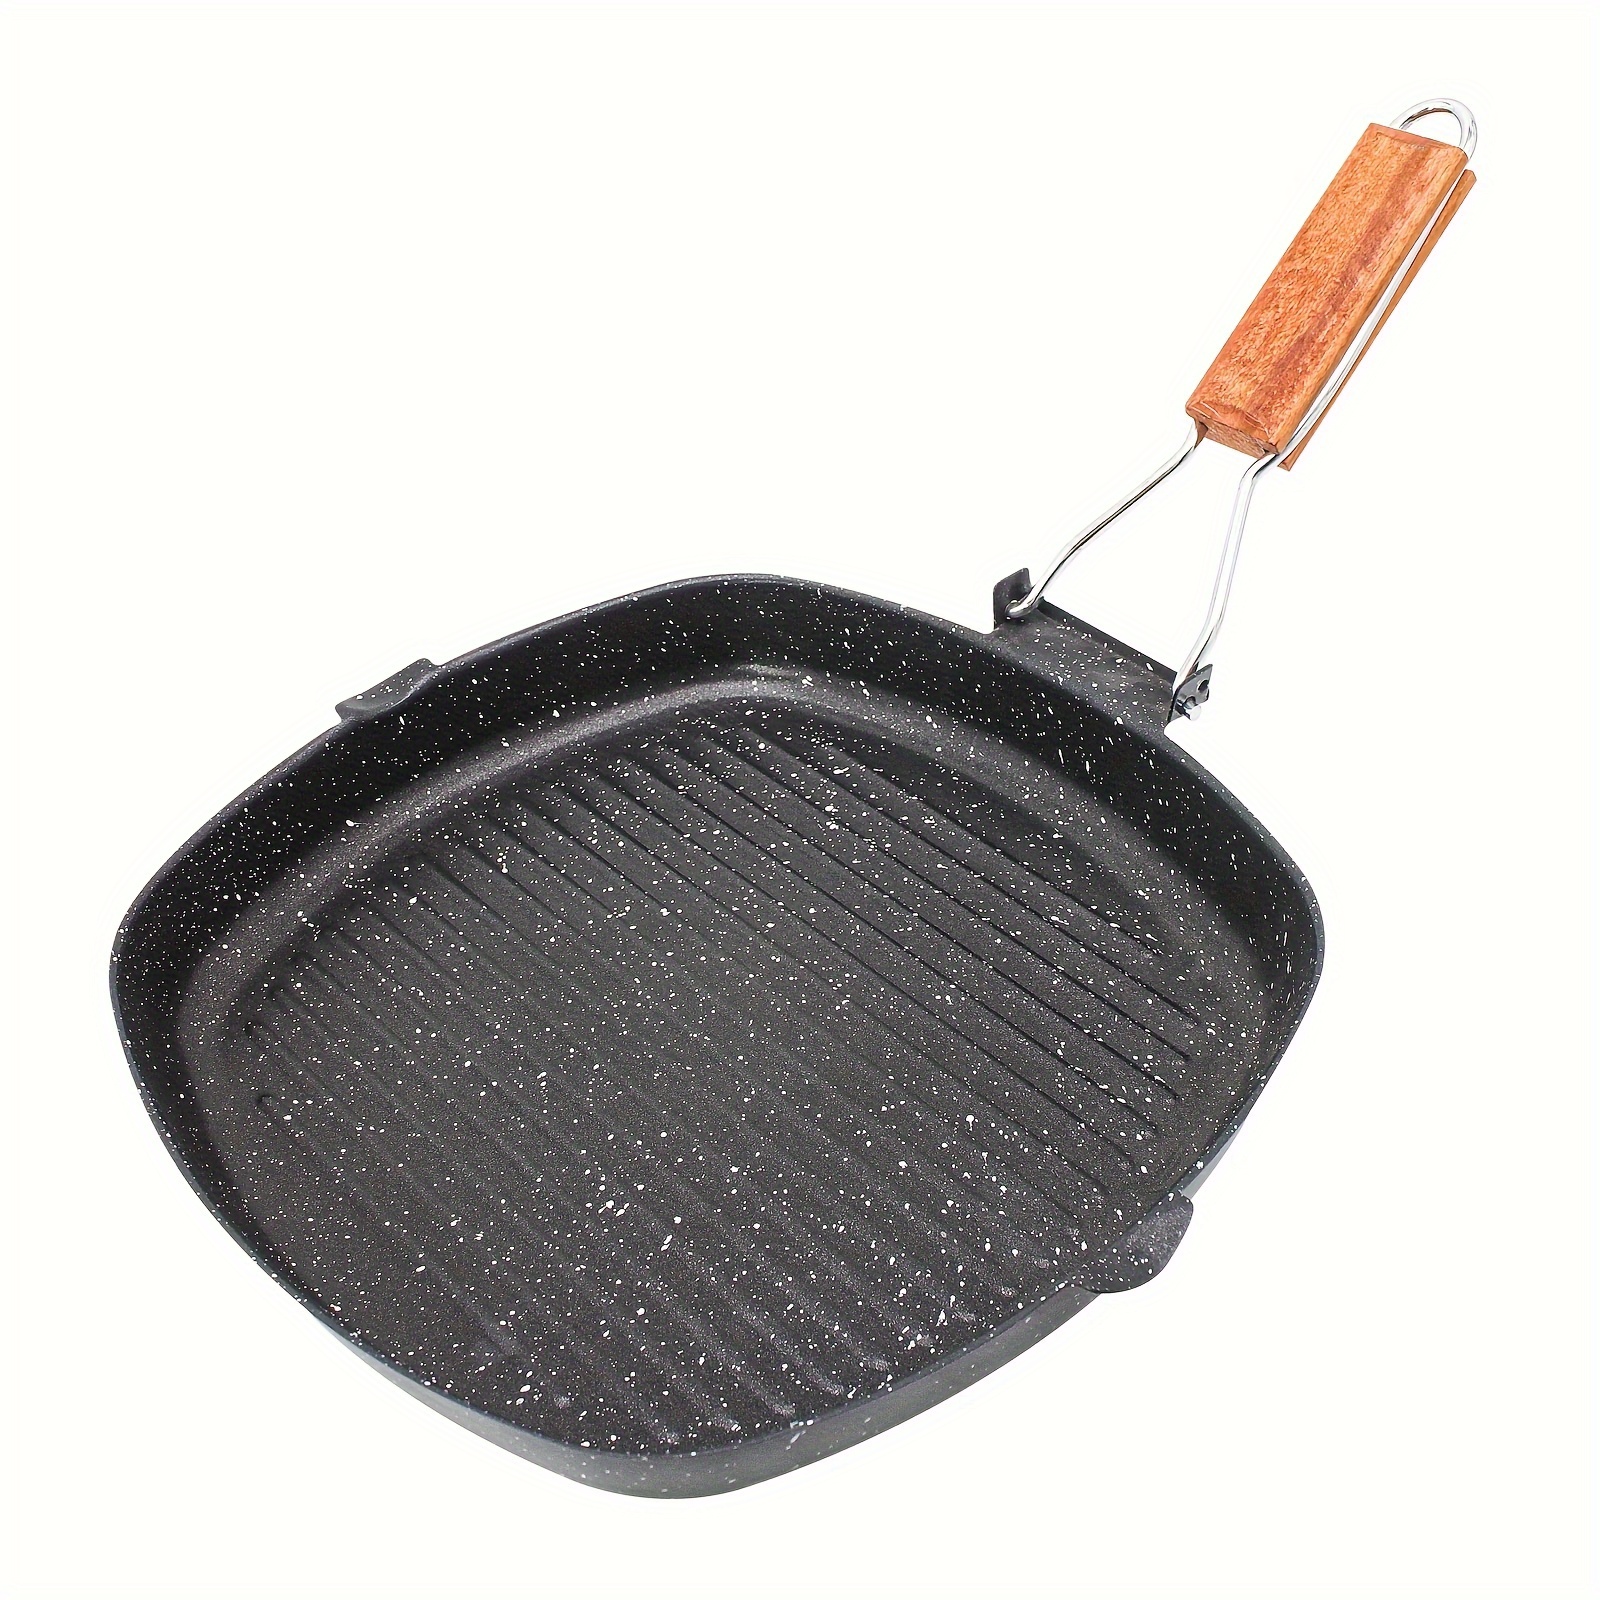 Voeux Kitchenware-Cast Iron Square Grill Pan,Griddle Nonstick